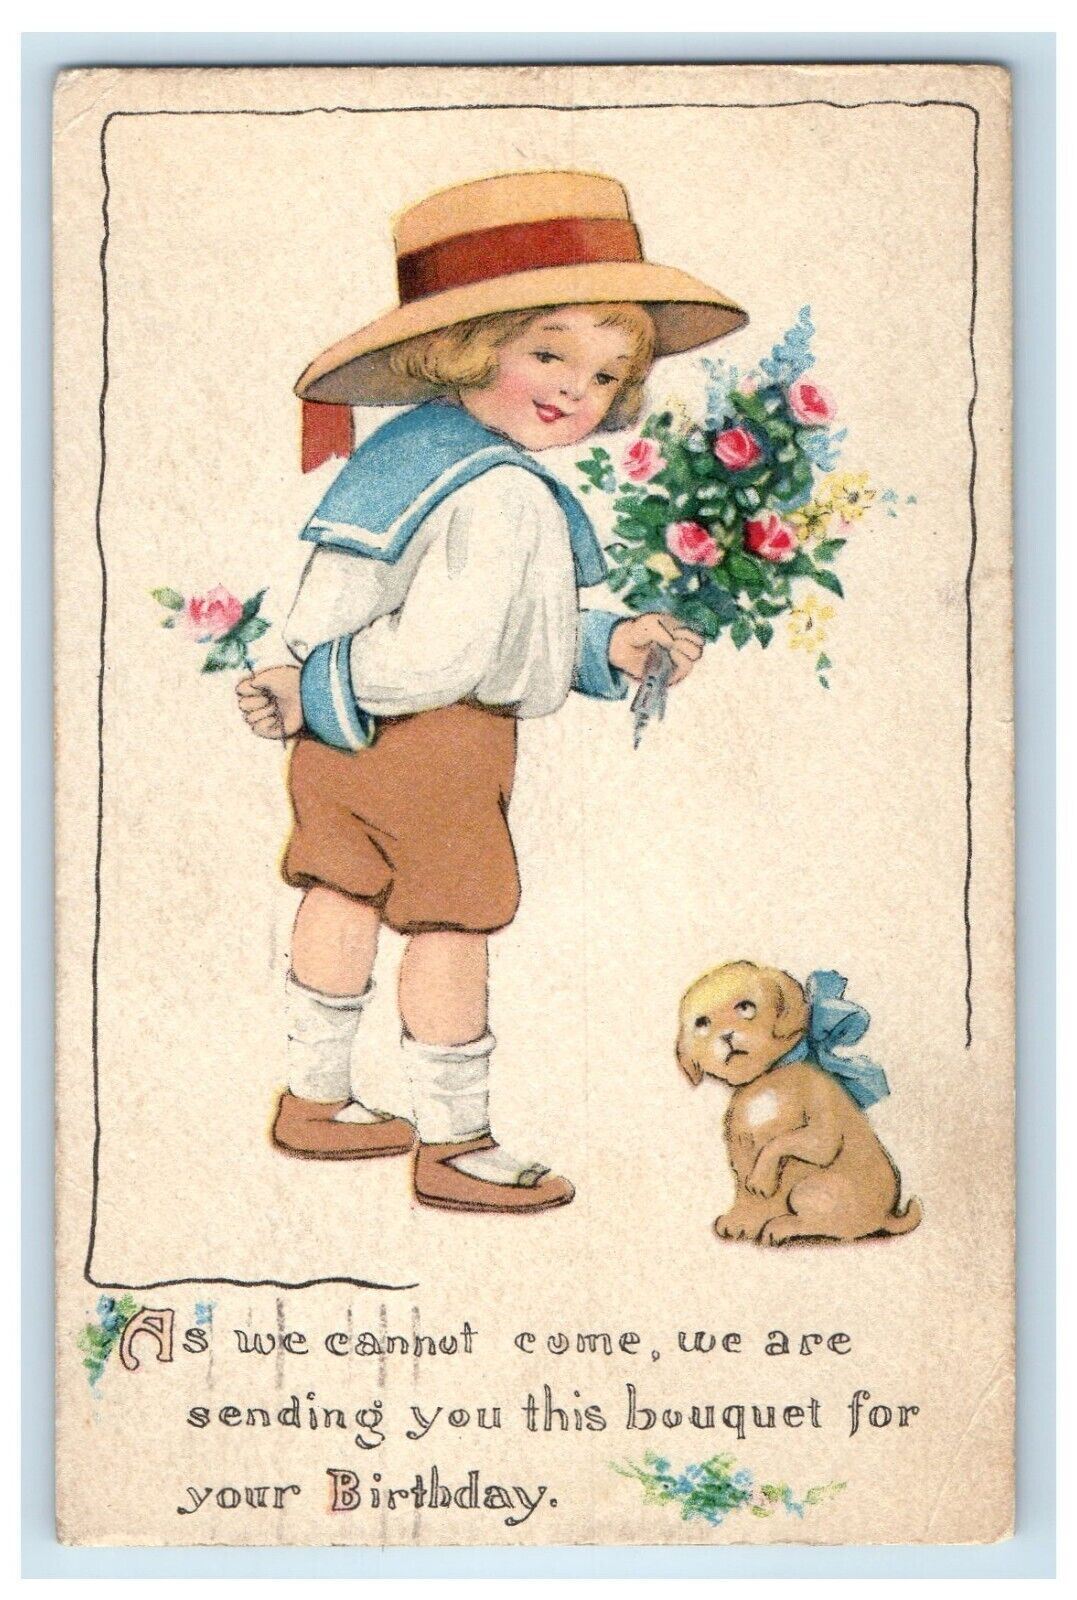 1920 Birthday Boy With Boquet Of Flowers And Dog Present Antique Postcard